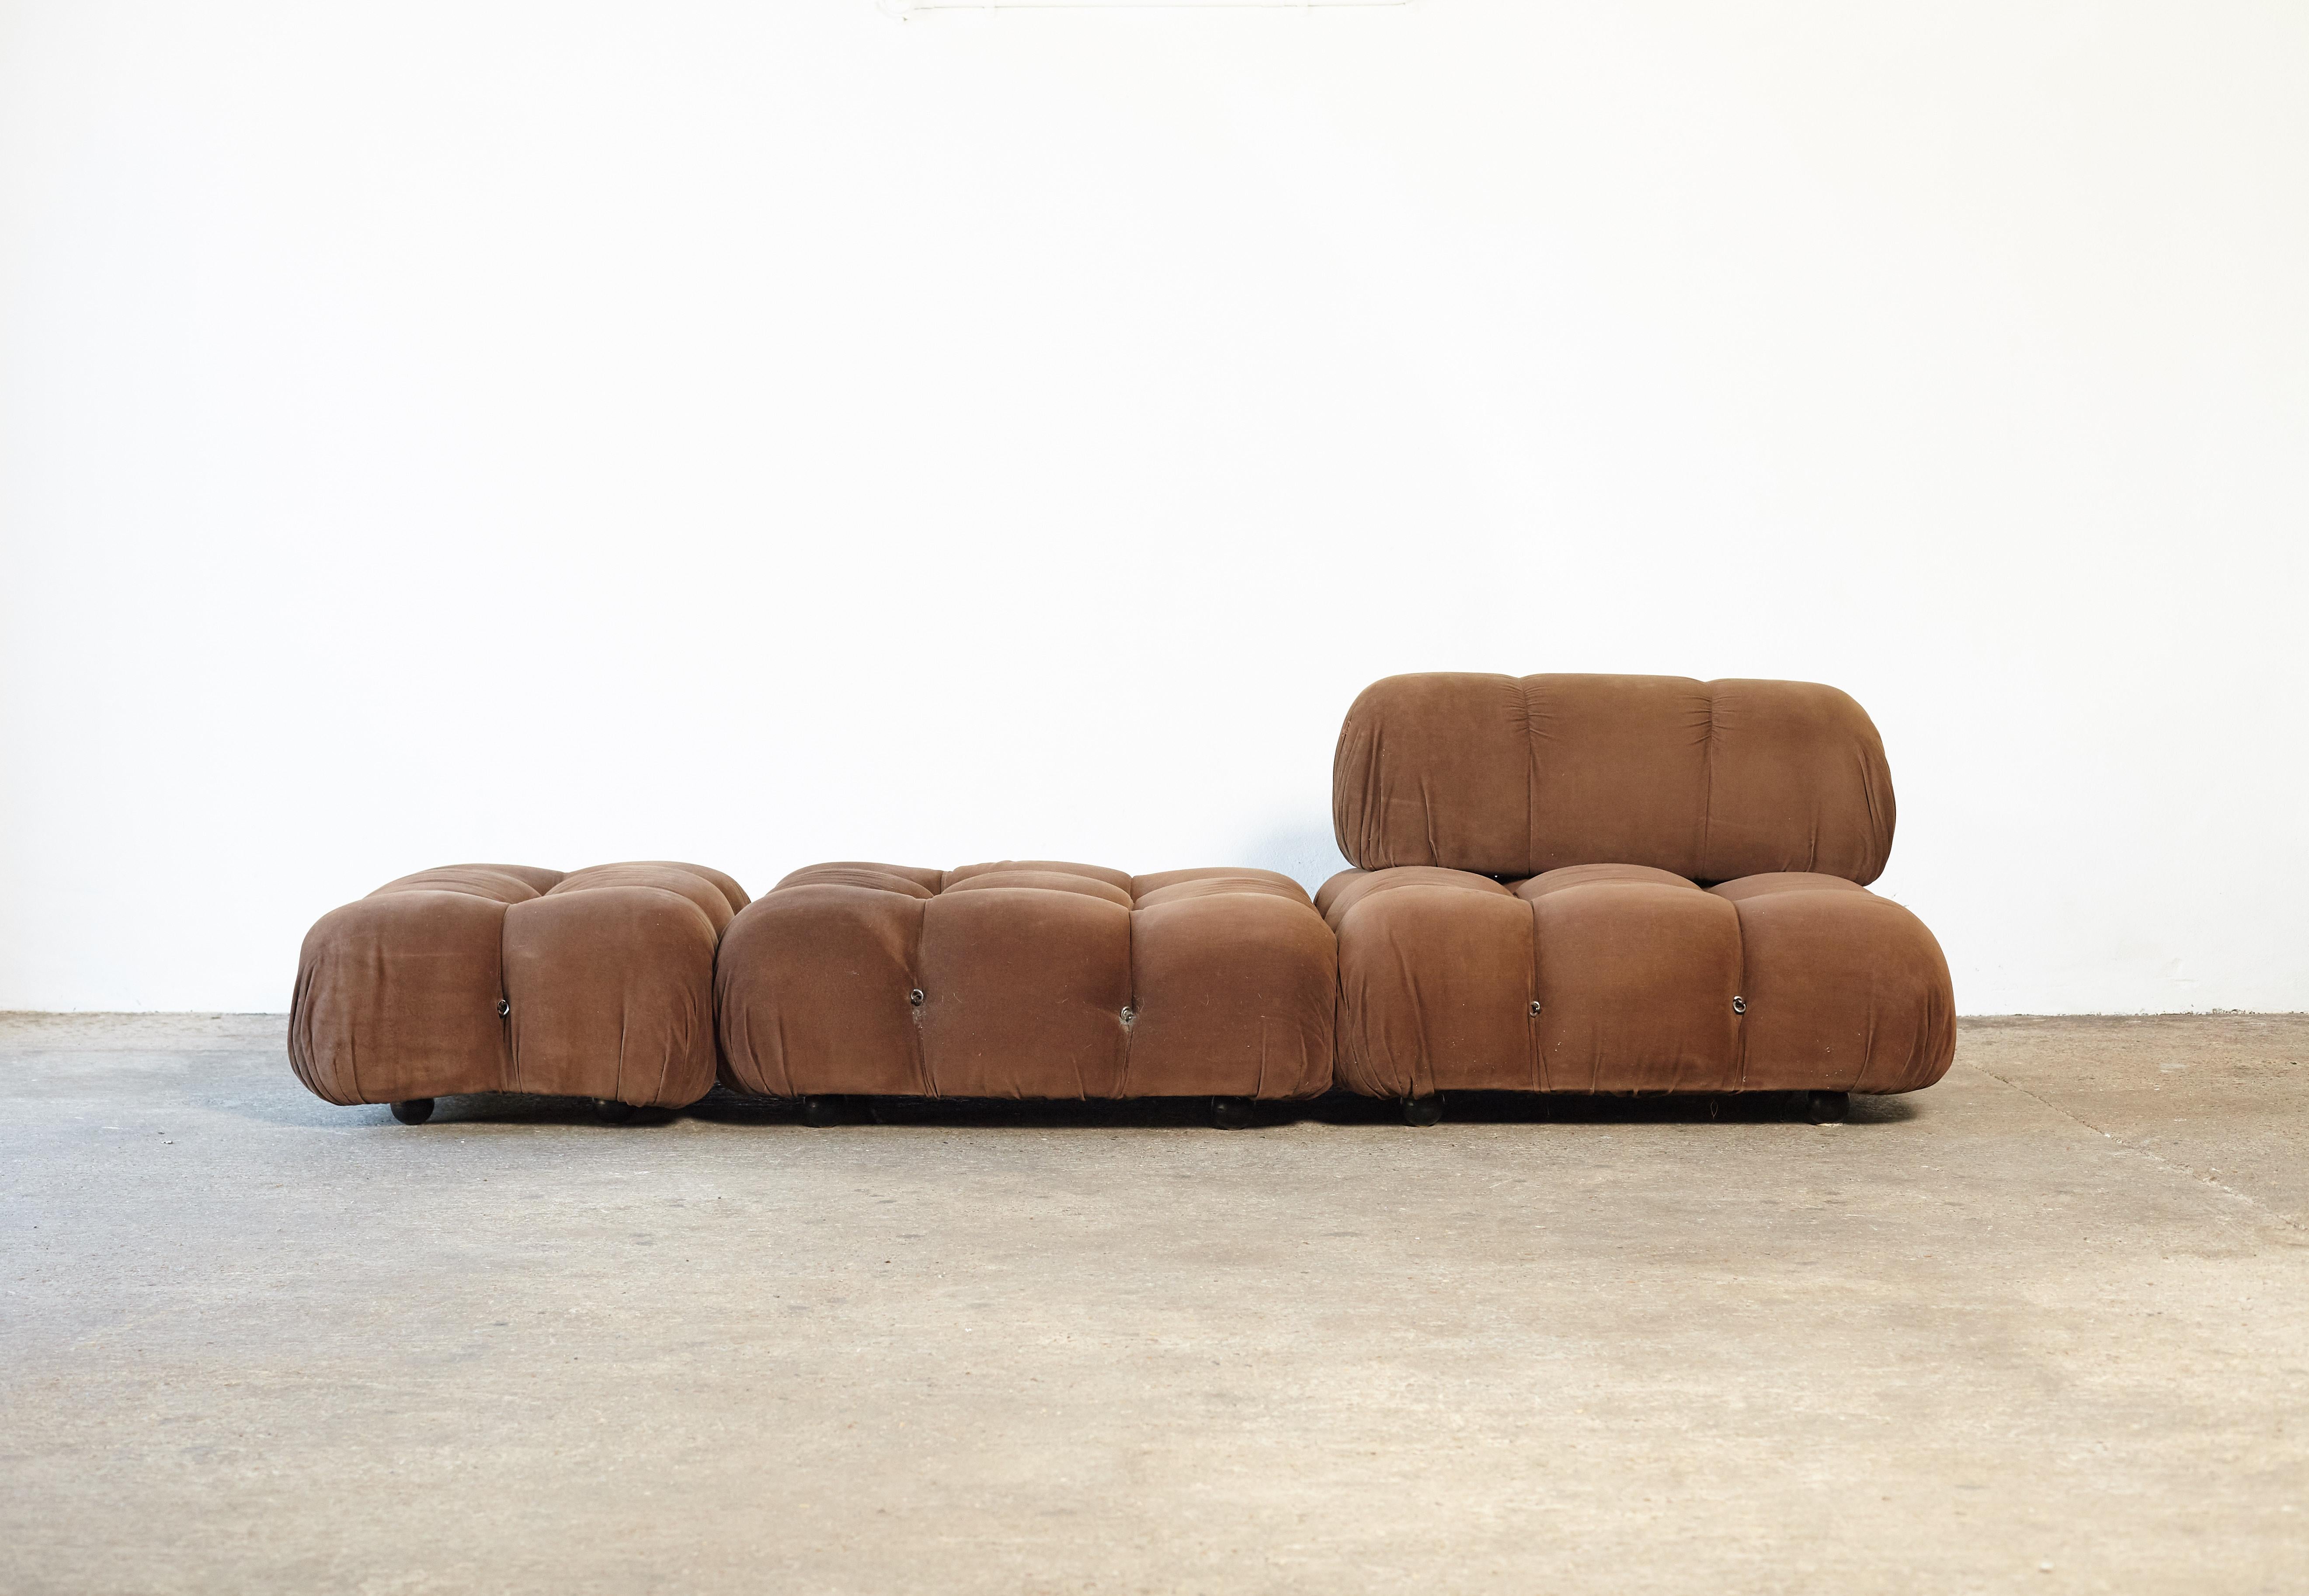 An extremely comfortable Mario Bellini Camaleonda modular sofa, made by B&B Italia, Italy, 1970s. Original tan fabric - no tears or damage but some light signs of use and wear. All parts are interchangeable. We can also assist with re-upholstery if